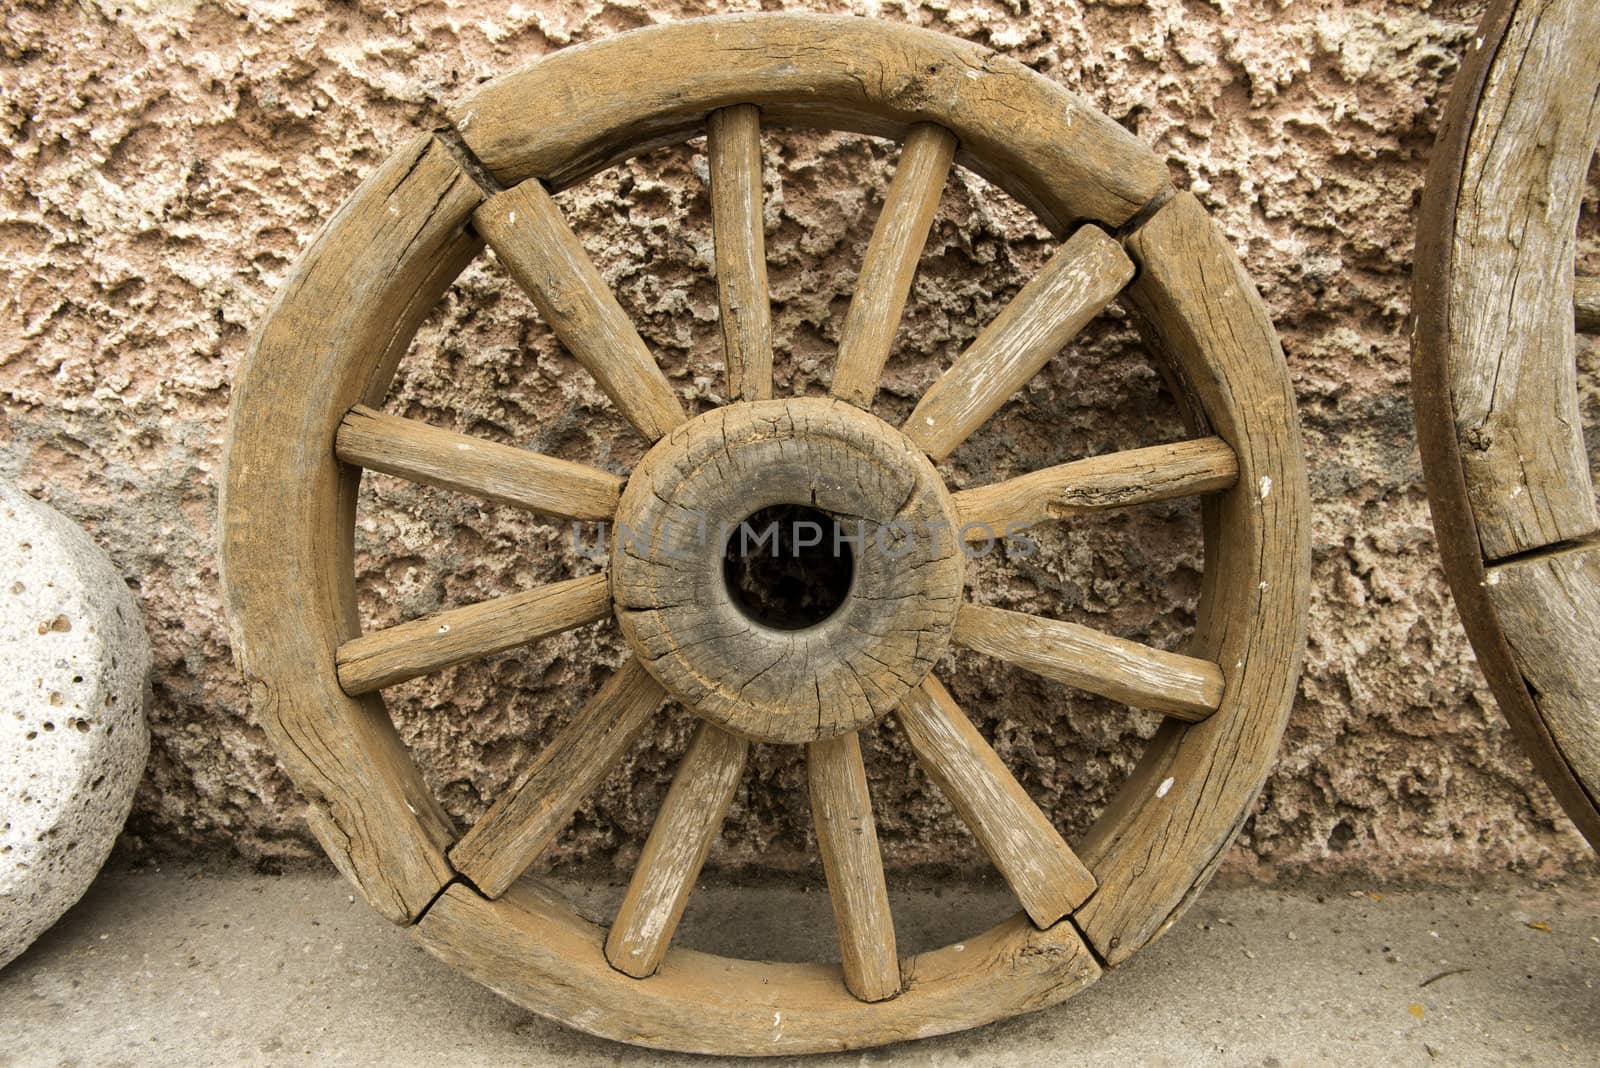 The old wooden cart wheel.  Made in Crete, Greece.